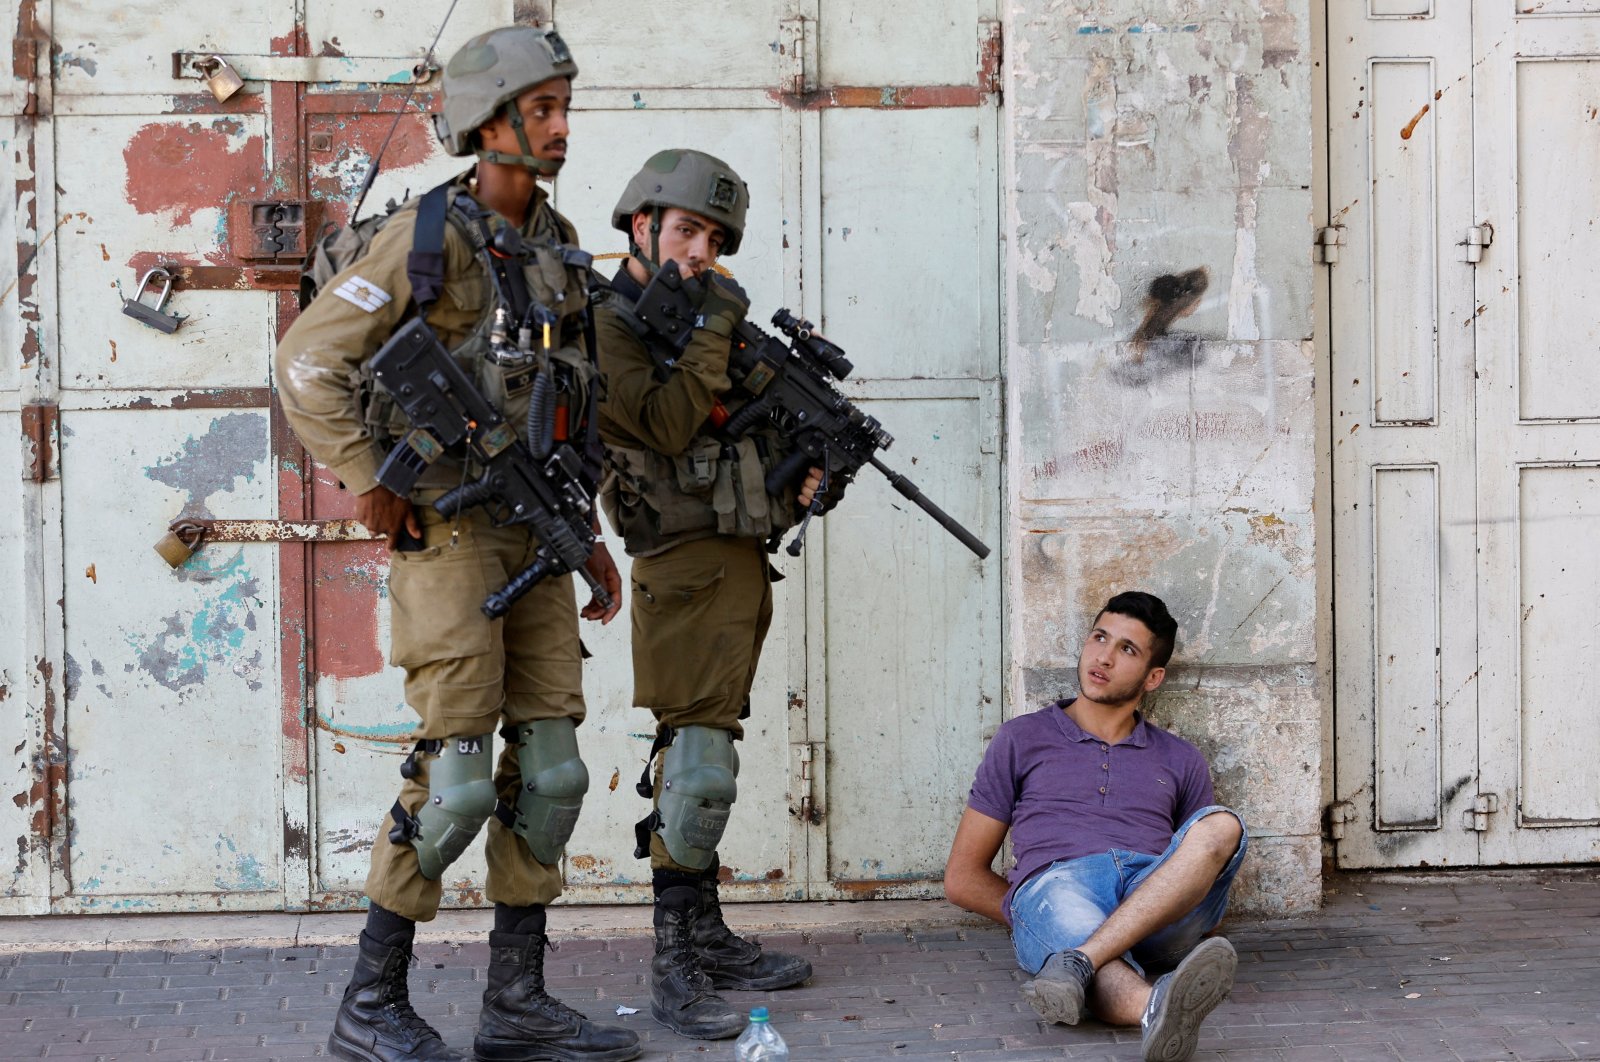 Israeli army soldiers detain a Palestinian during their clash with Palestinians in Hebron, the Israeli-occupied West Bank, Palestine, Aug. 26, 2022. (Reuters Photo)